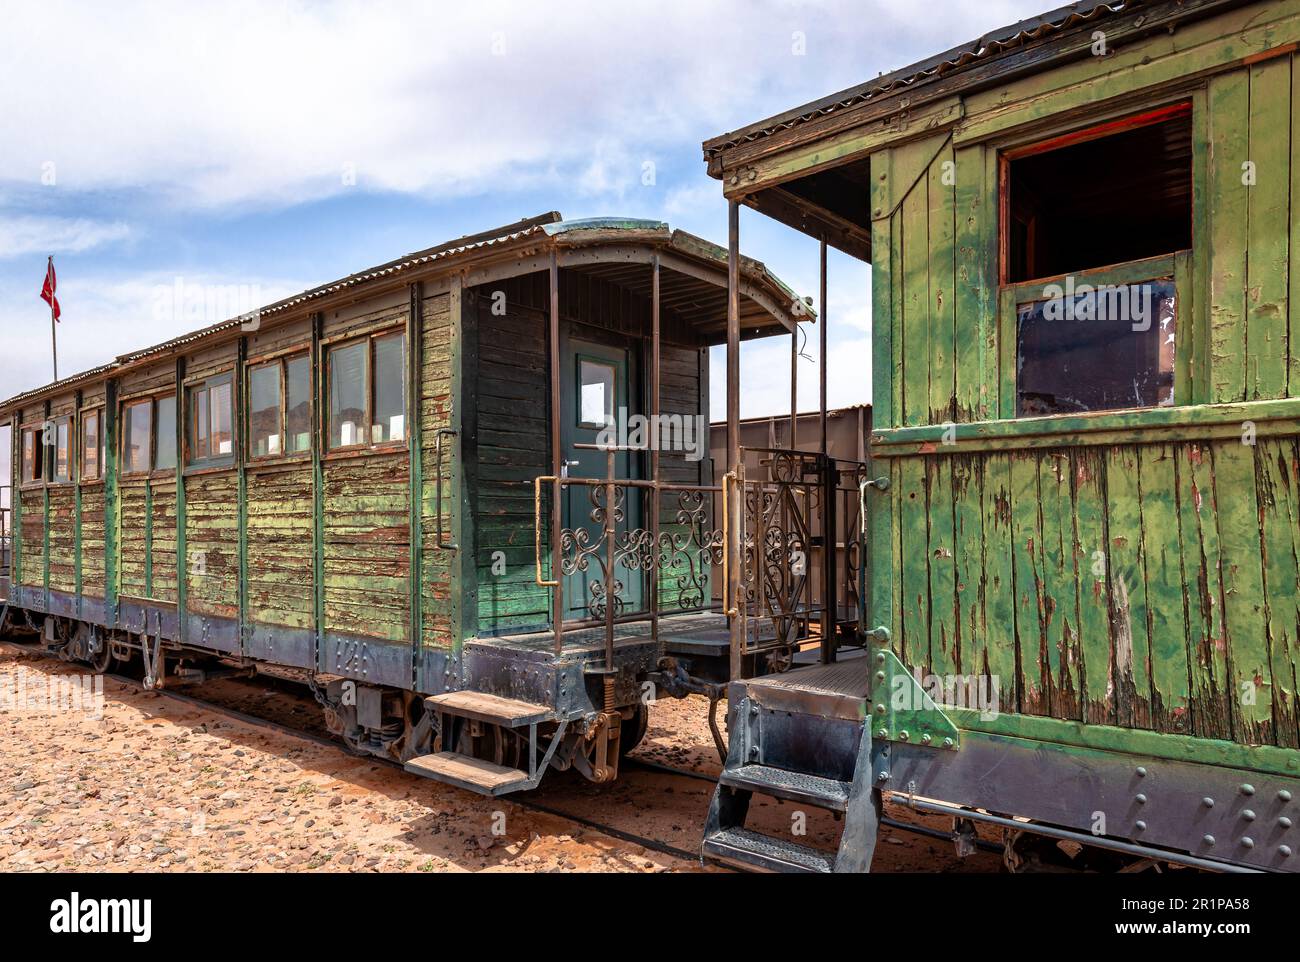 Obsolete train wagons from a bygone era in Wadi Rum, the famous Jordanian desert. Stock Photo